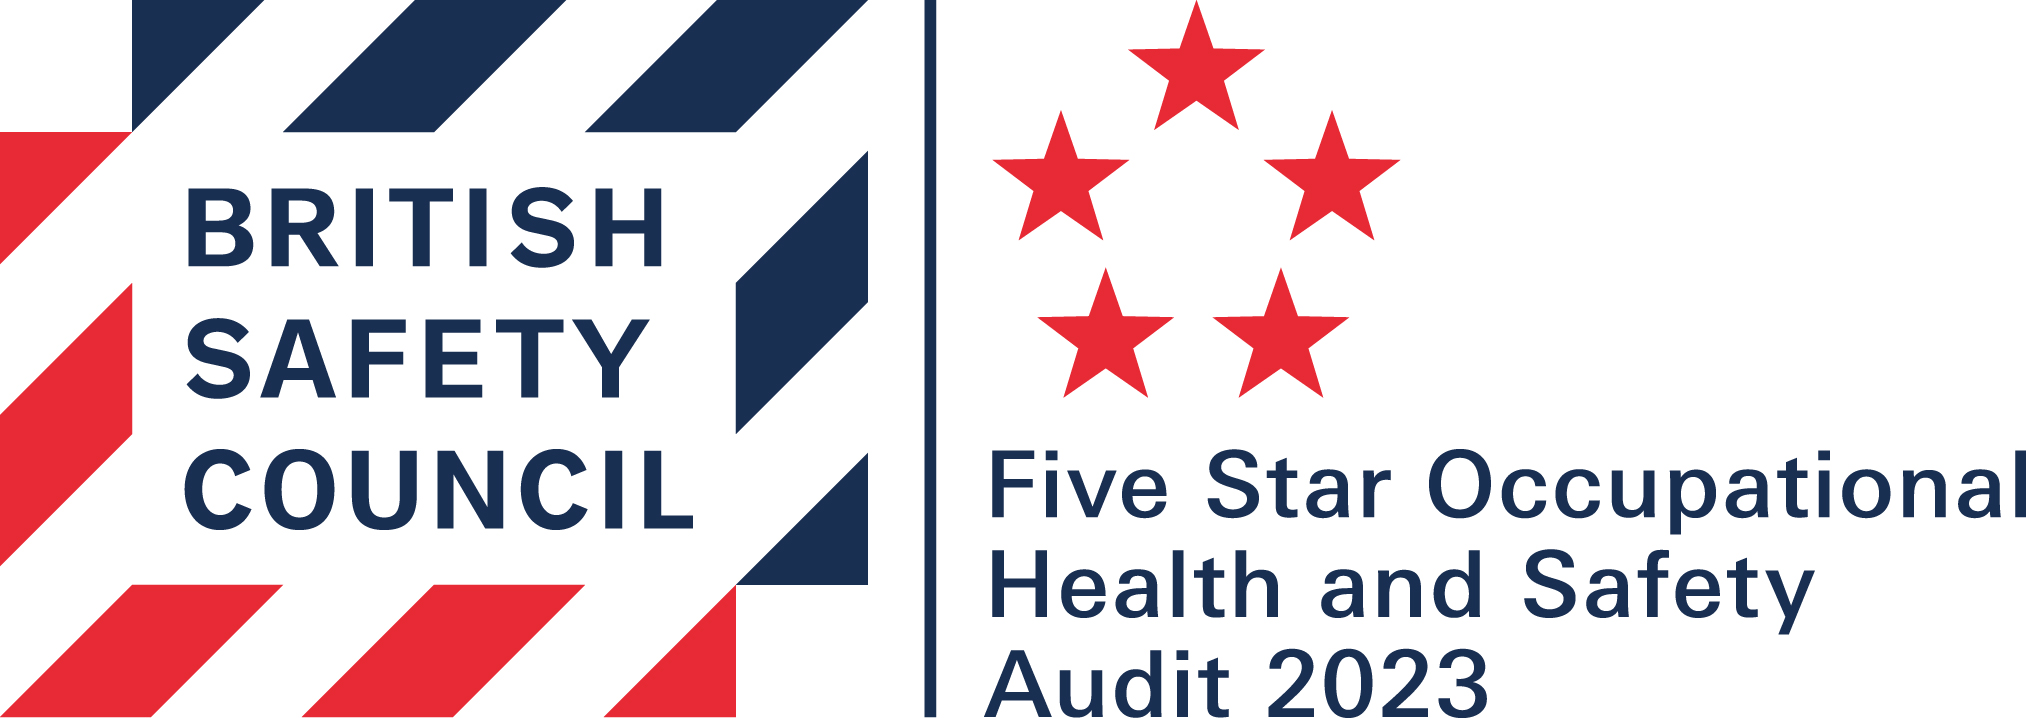 British Safety Council - 5-star rated - Occupational Health and Safety Audit